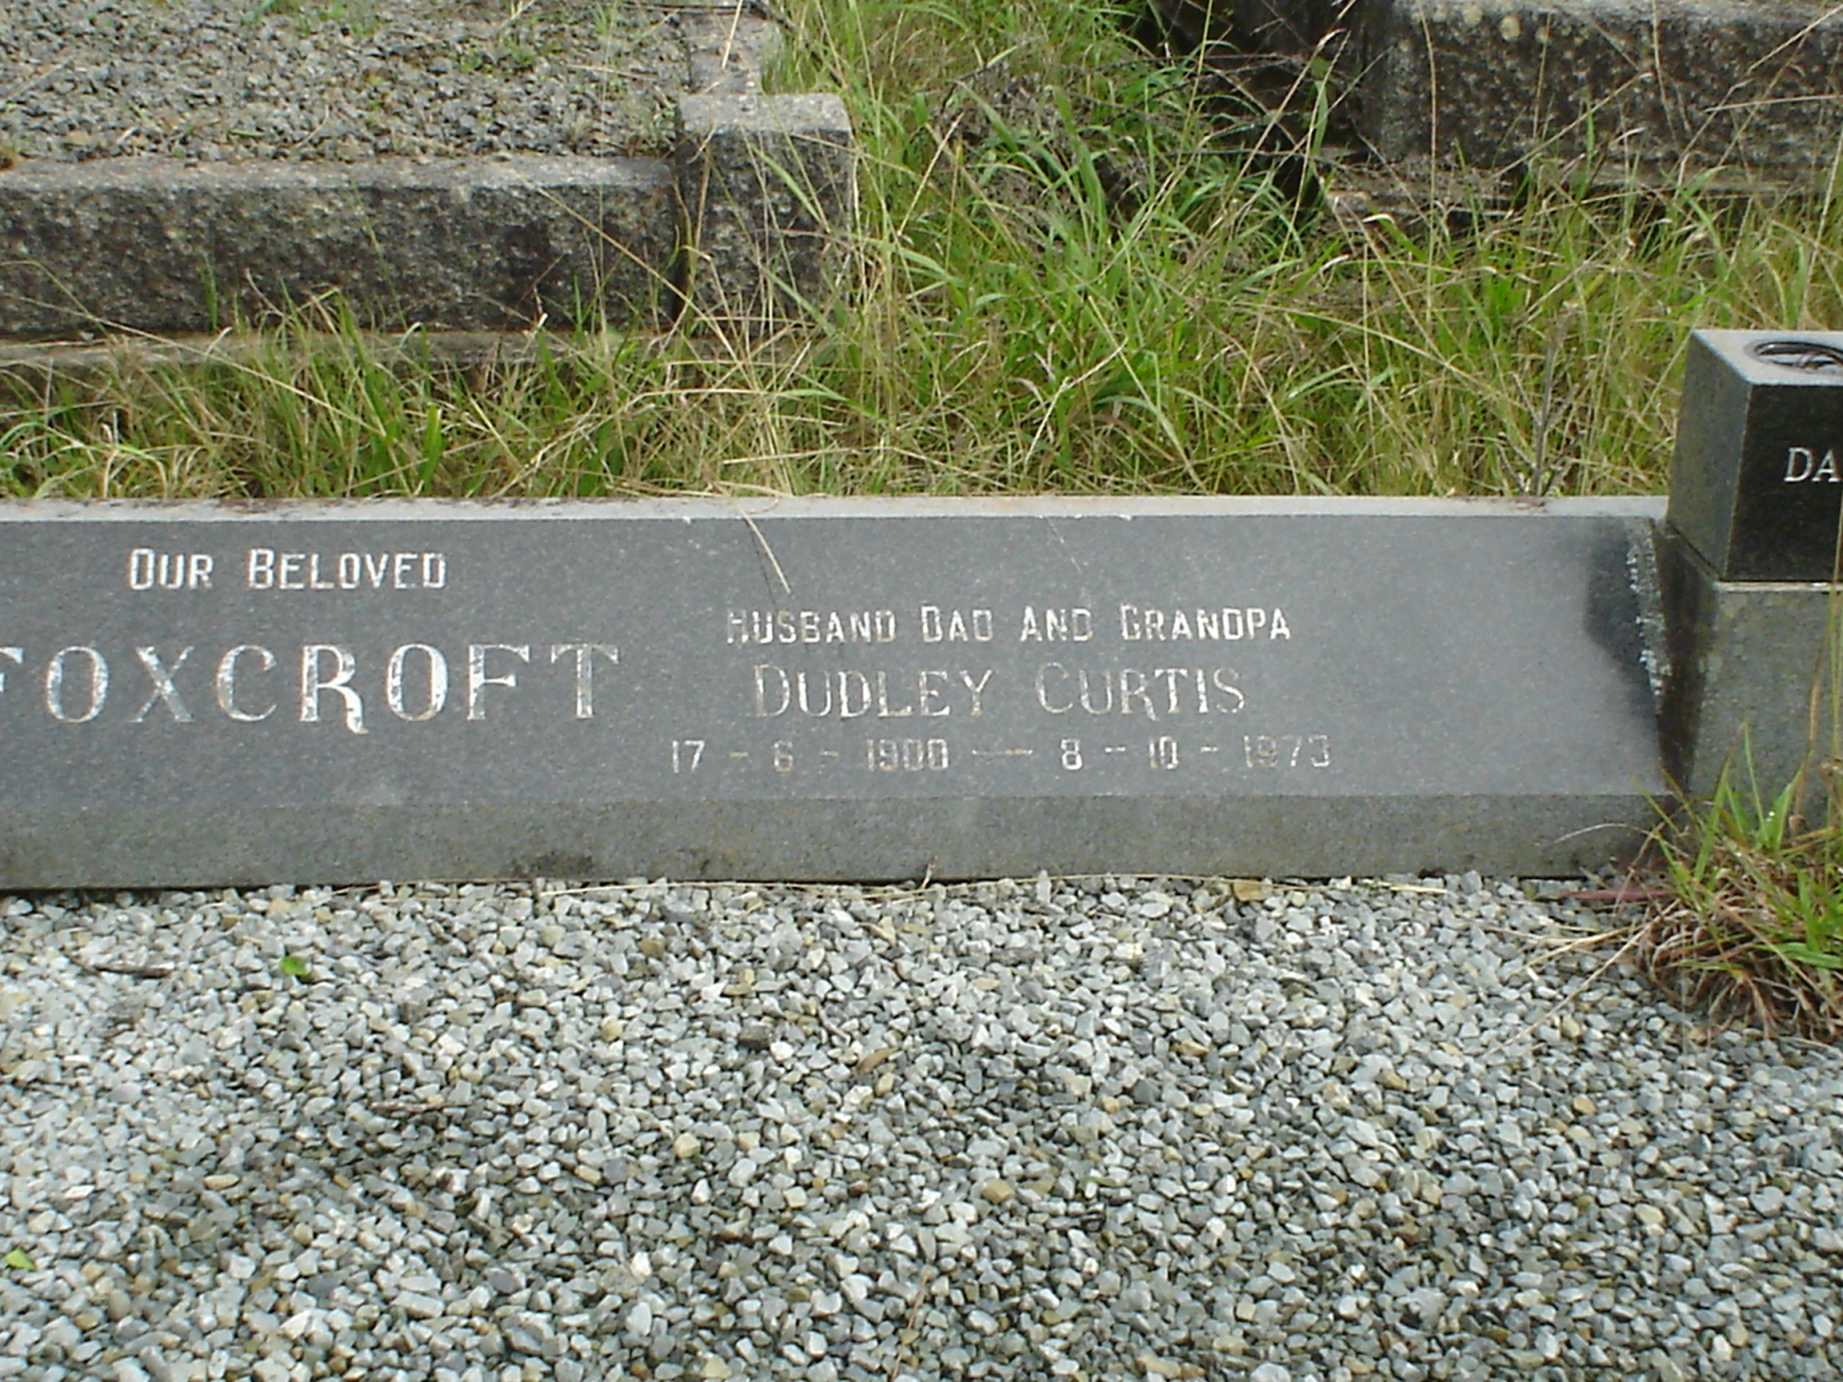 FOXCROFT Dudley Curtis 1900-1973